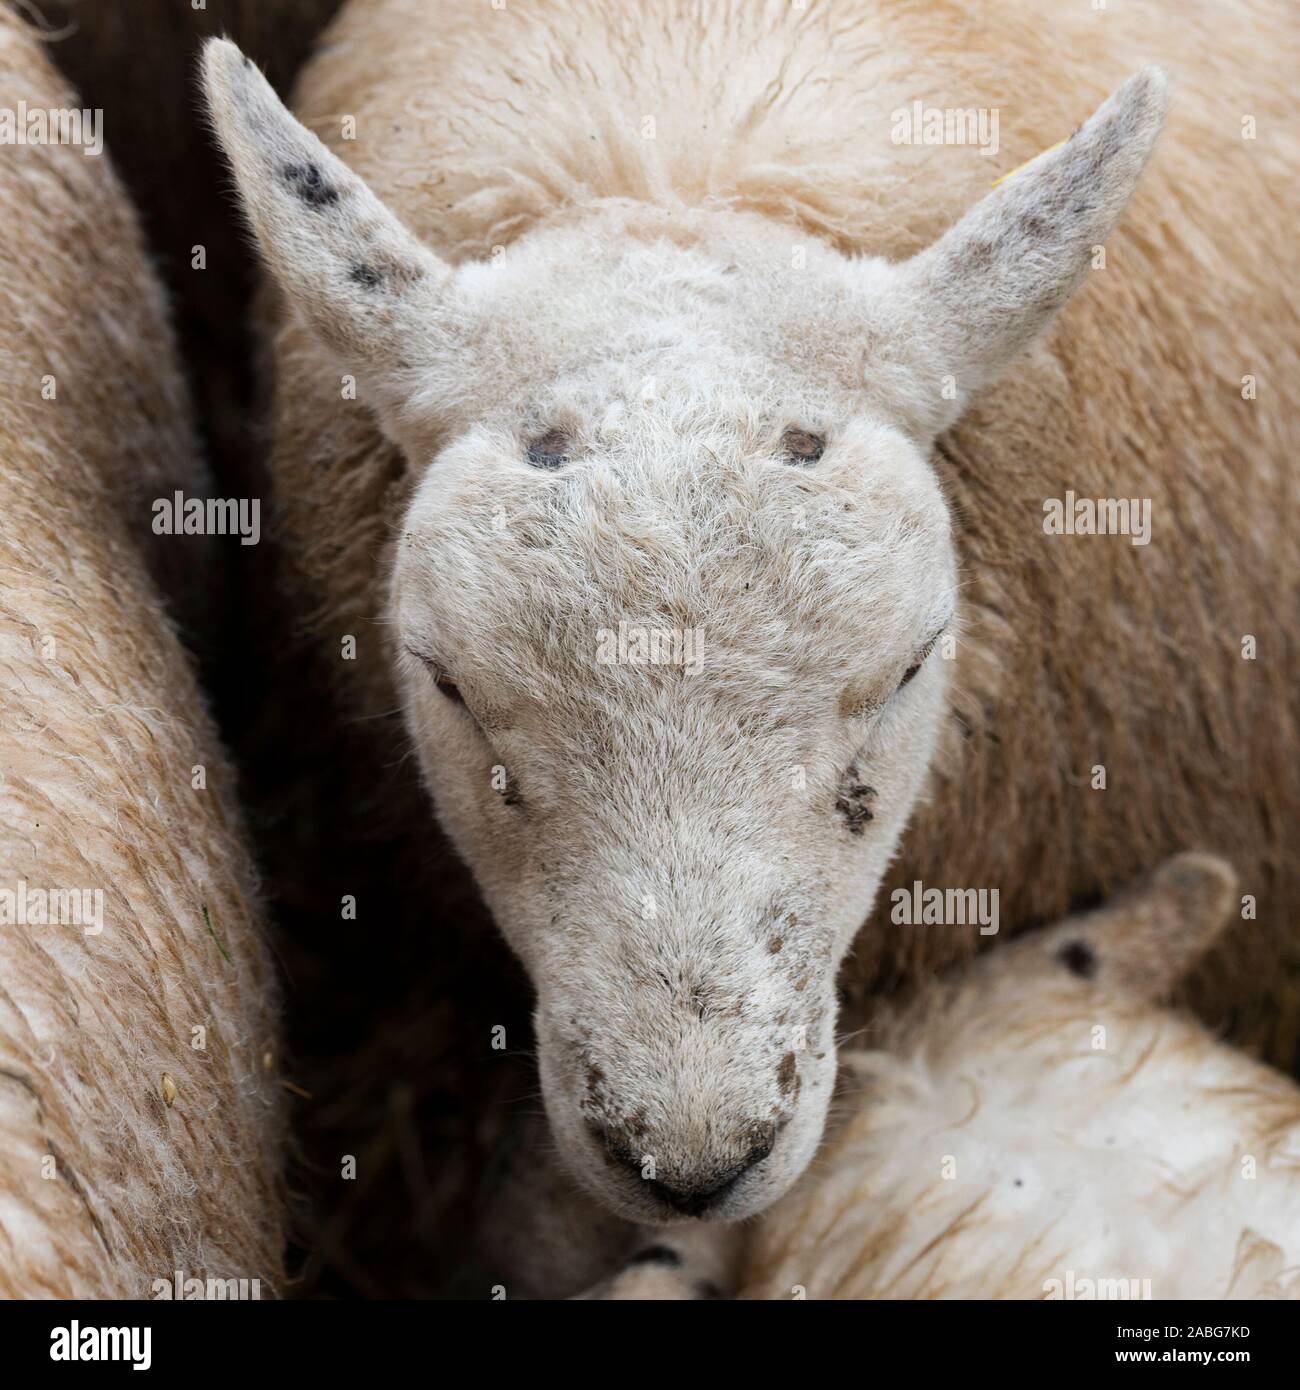 Uppingham, Rutland, UK. 27th Nov, 2019. Sheep being exhibited at the Uppingham Fat Stock show. Credit: Michael David Murphy / Alamy Live News Stock Photo